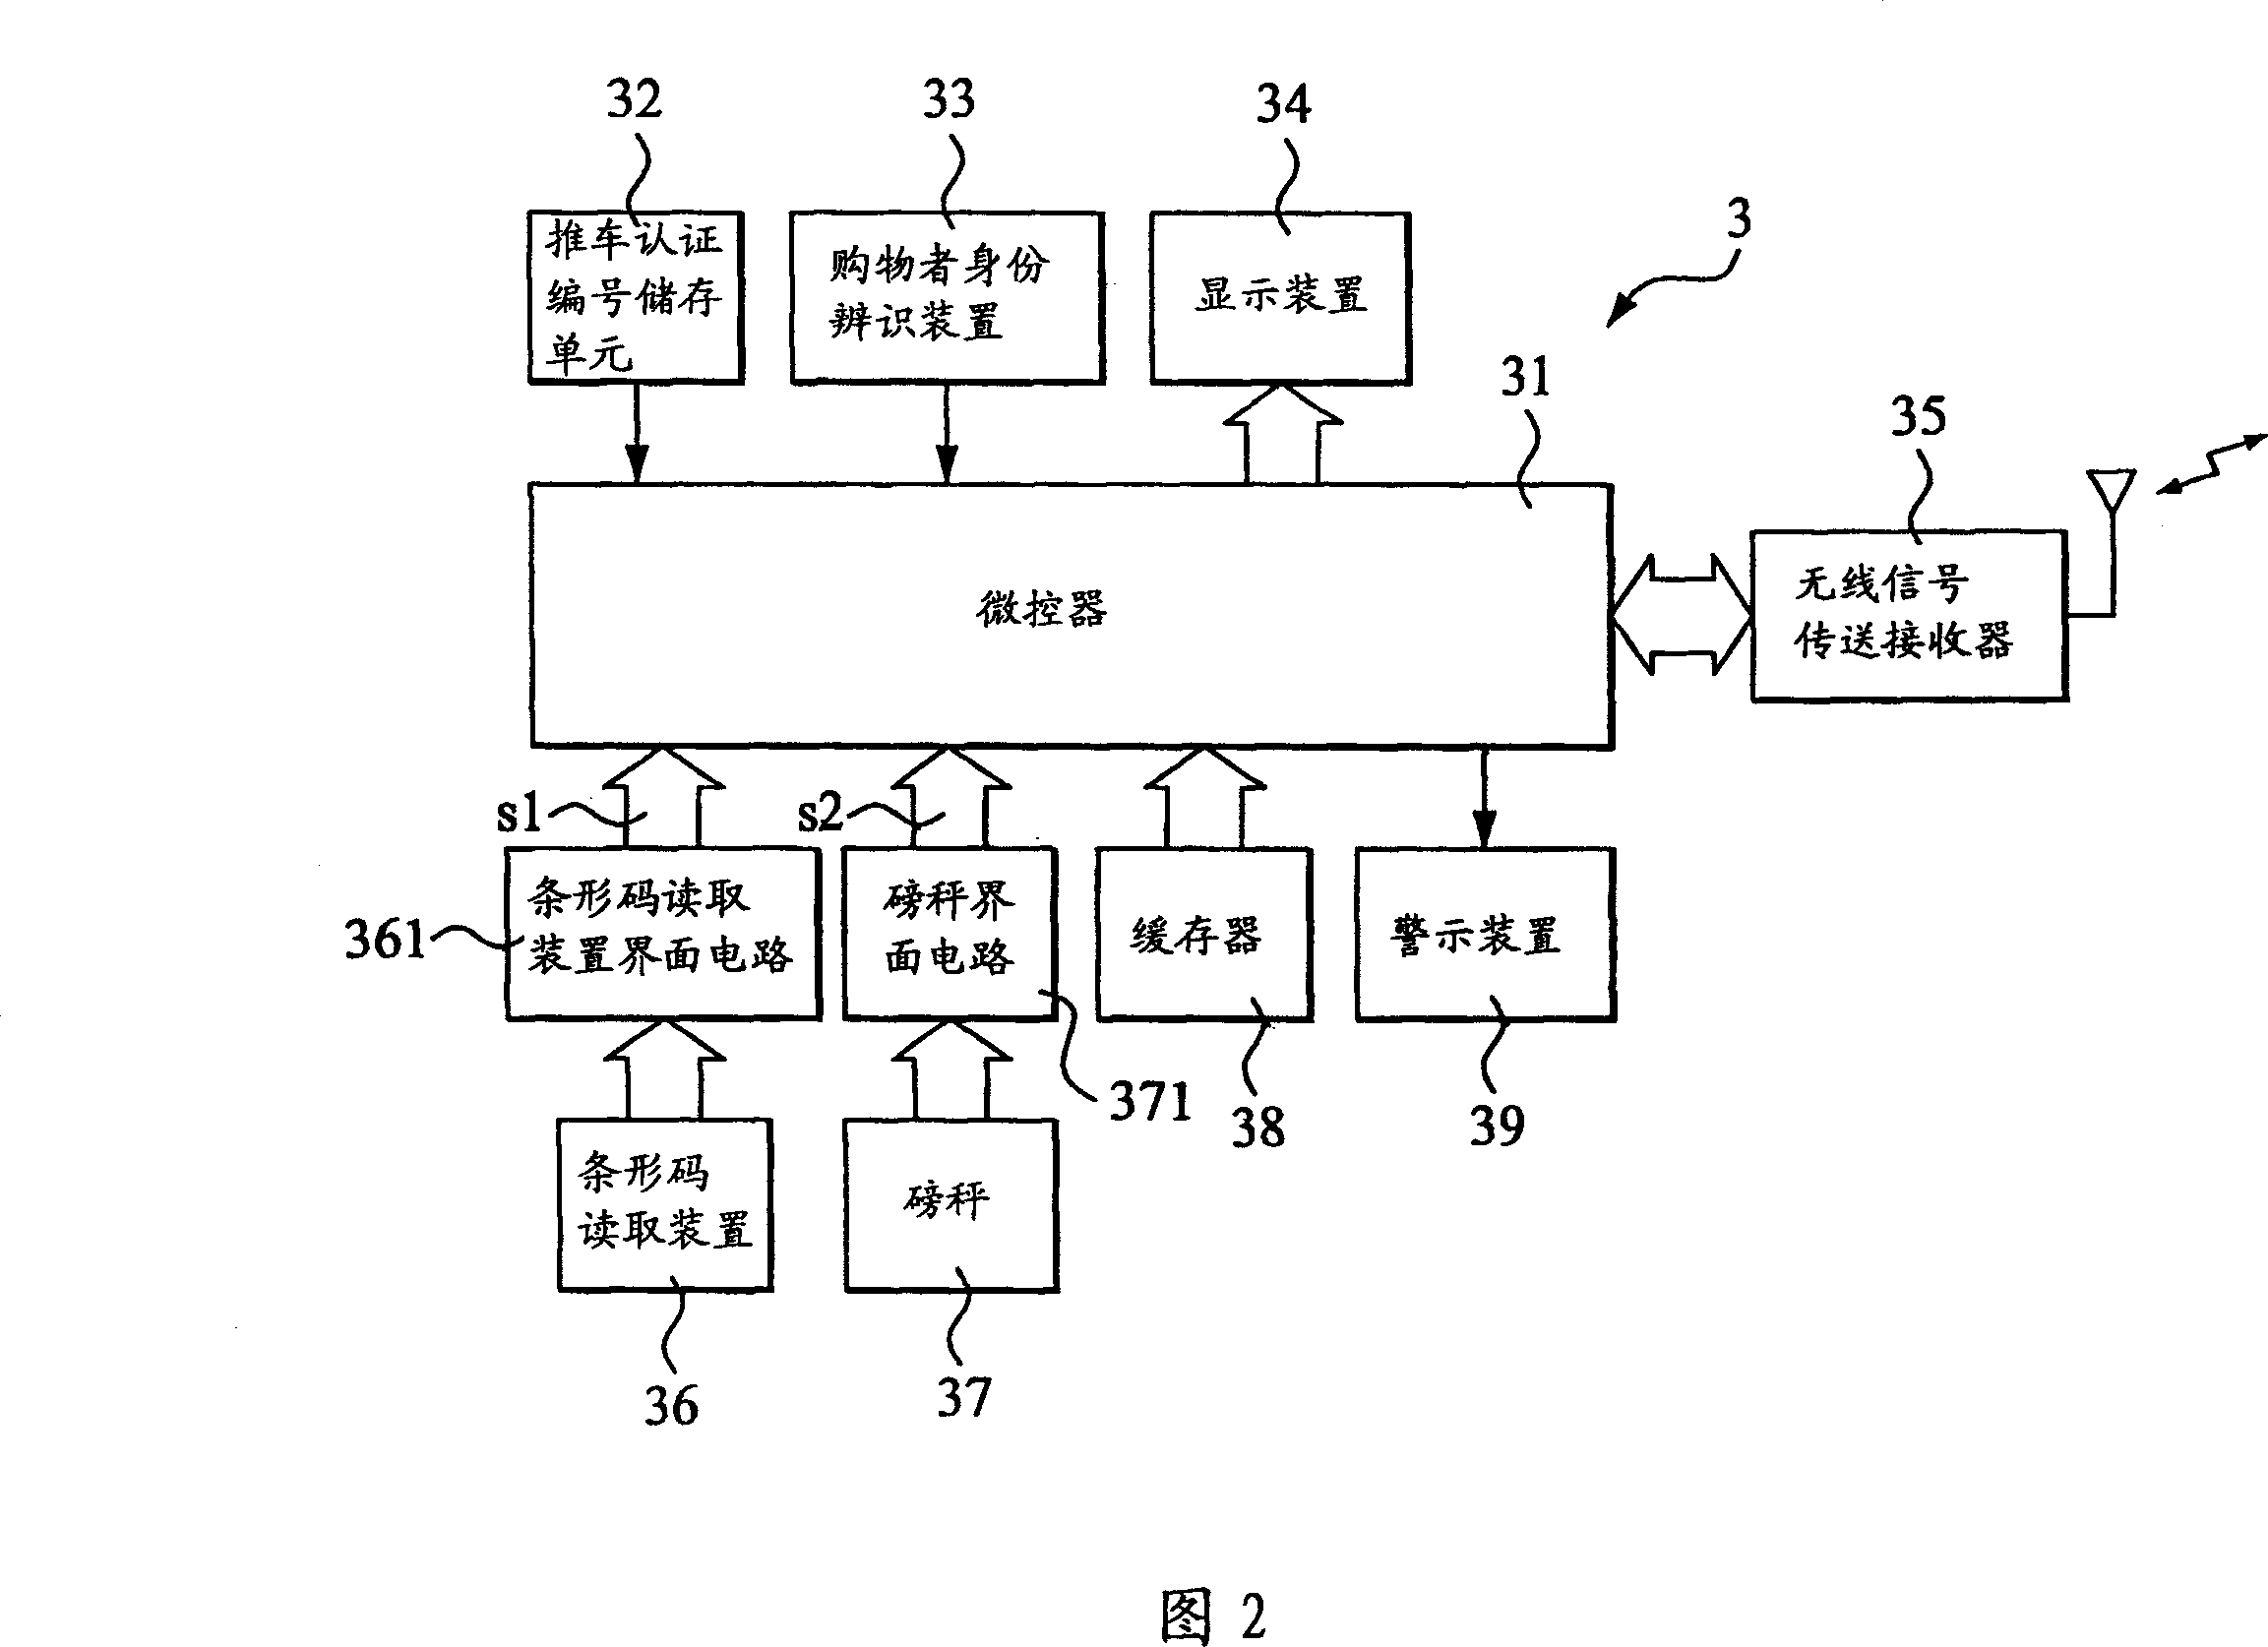 Automatic market shopping management system and method